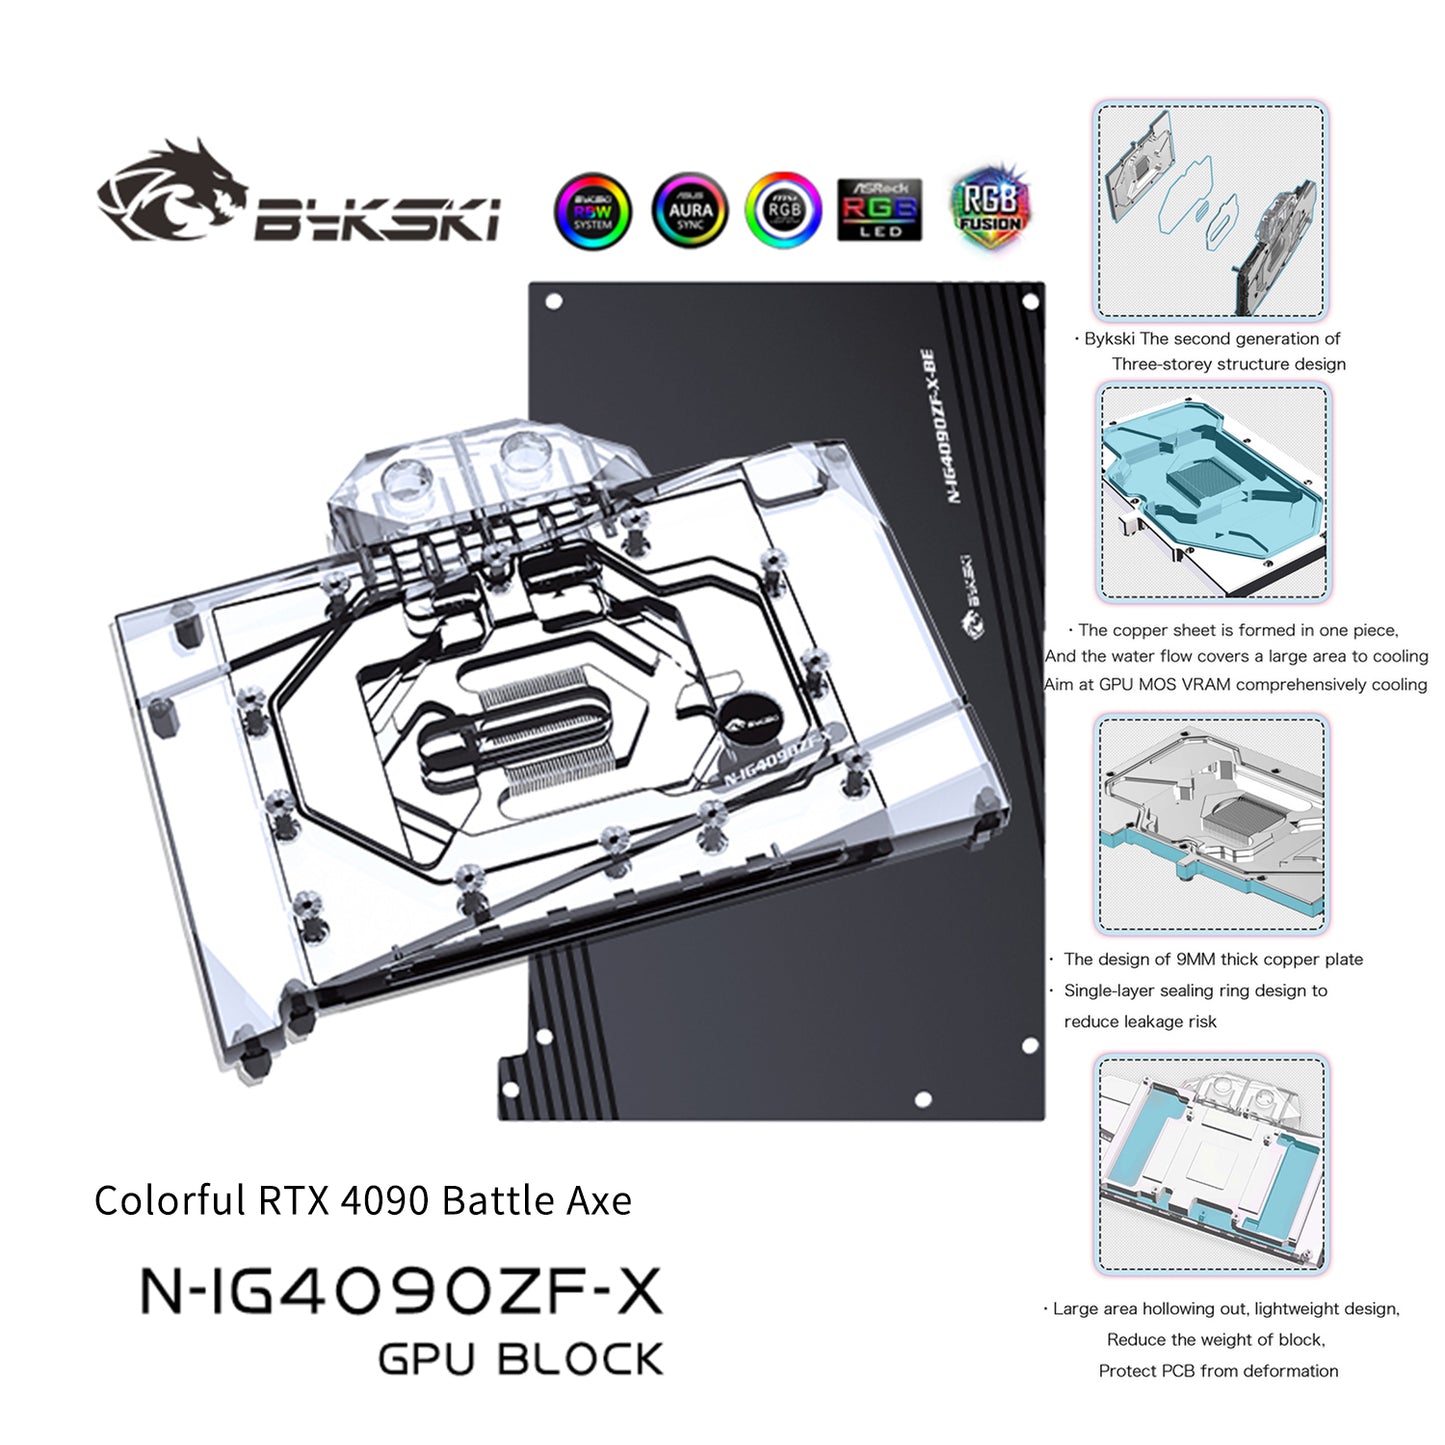 Bykski GPU Water Block For Colorful RTX 4090 Battle Axe, Full Cover With Backplate PC Water Cooling Cooler, N-IG4090ZF-X